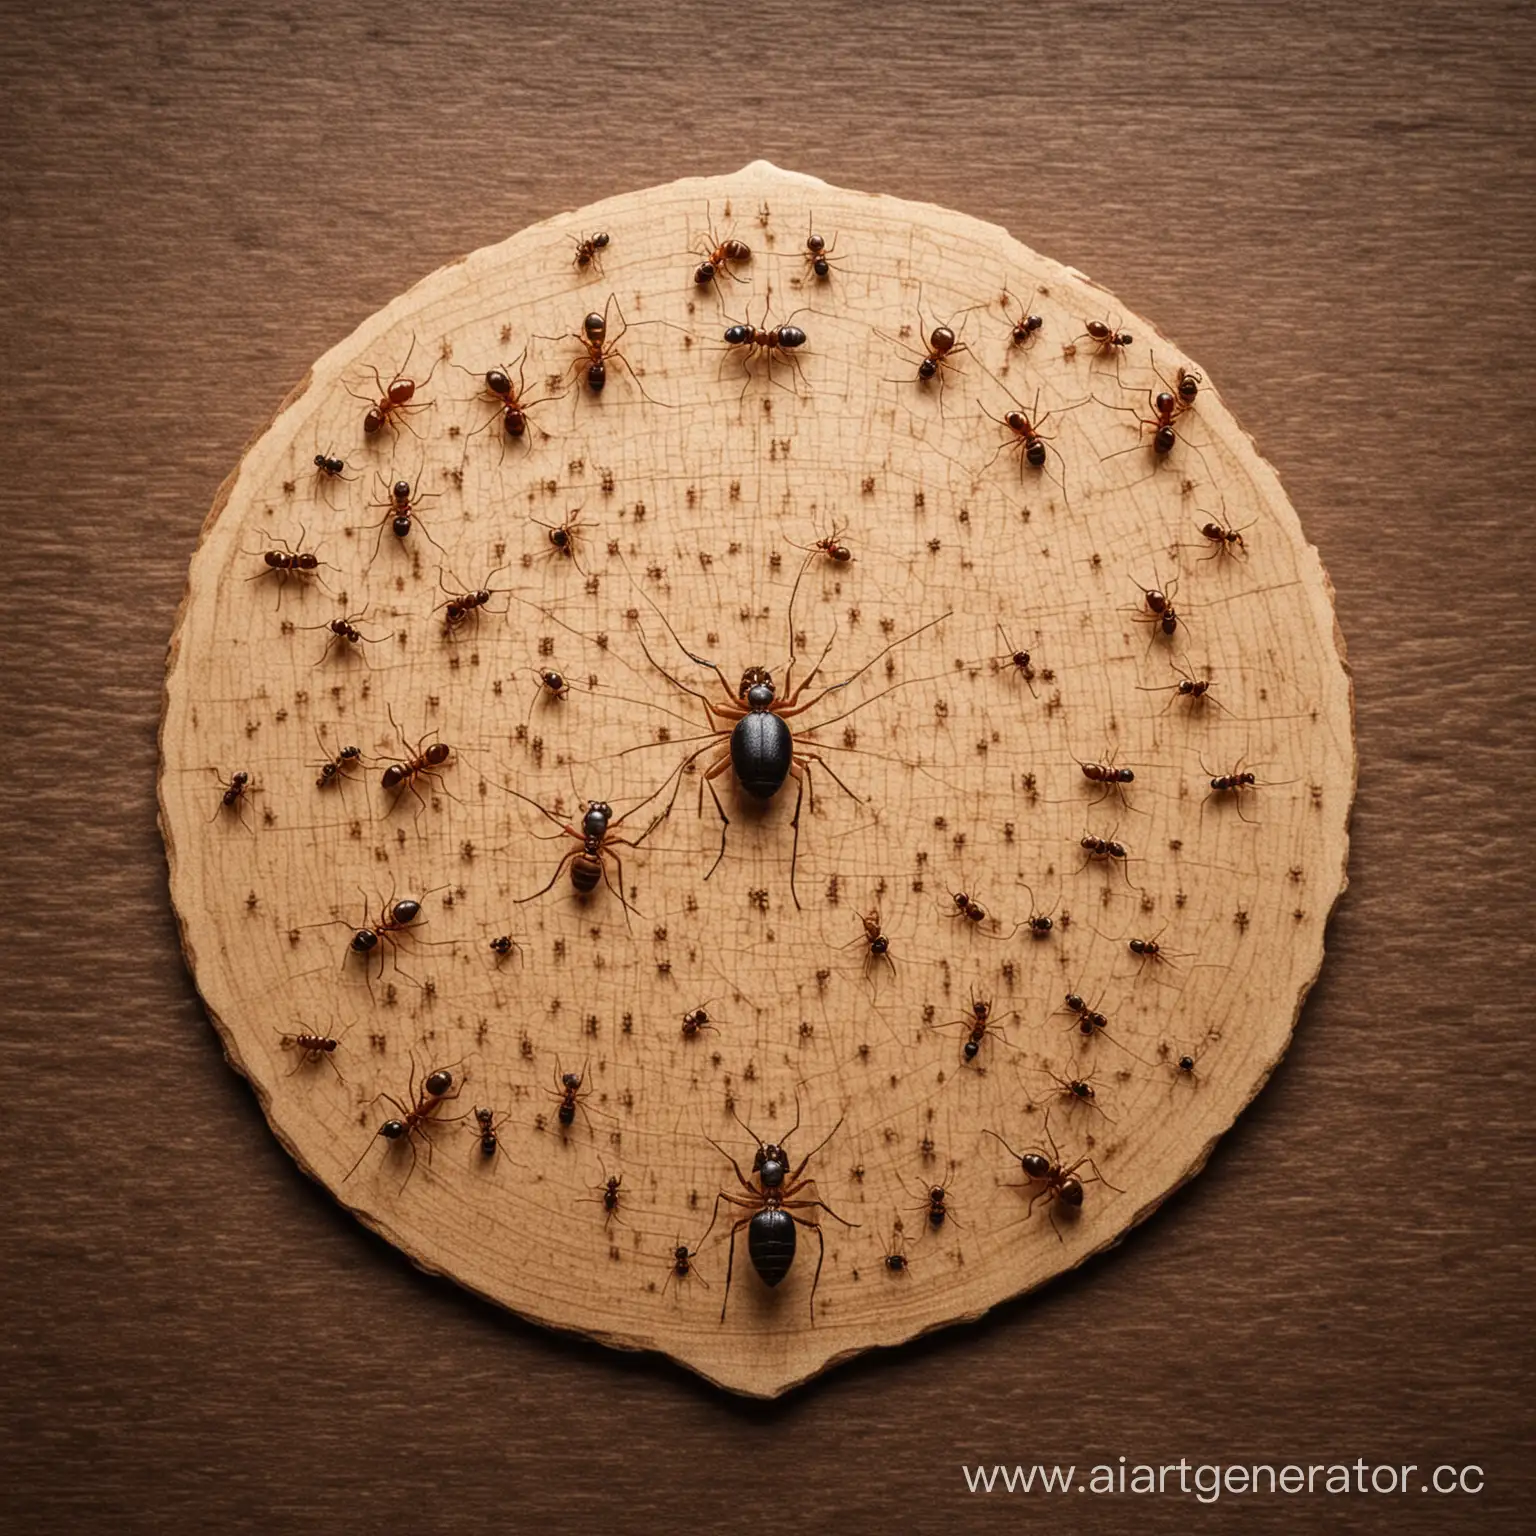 Busy-Ant-Colony-Working-Together-in-Intricate-Patterns